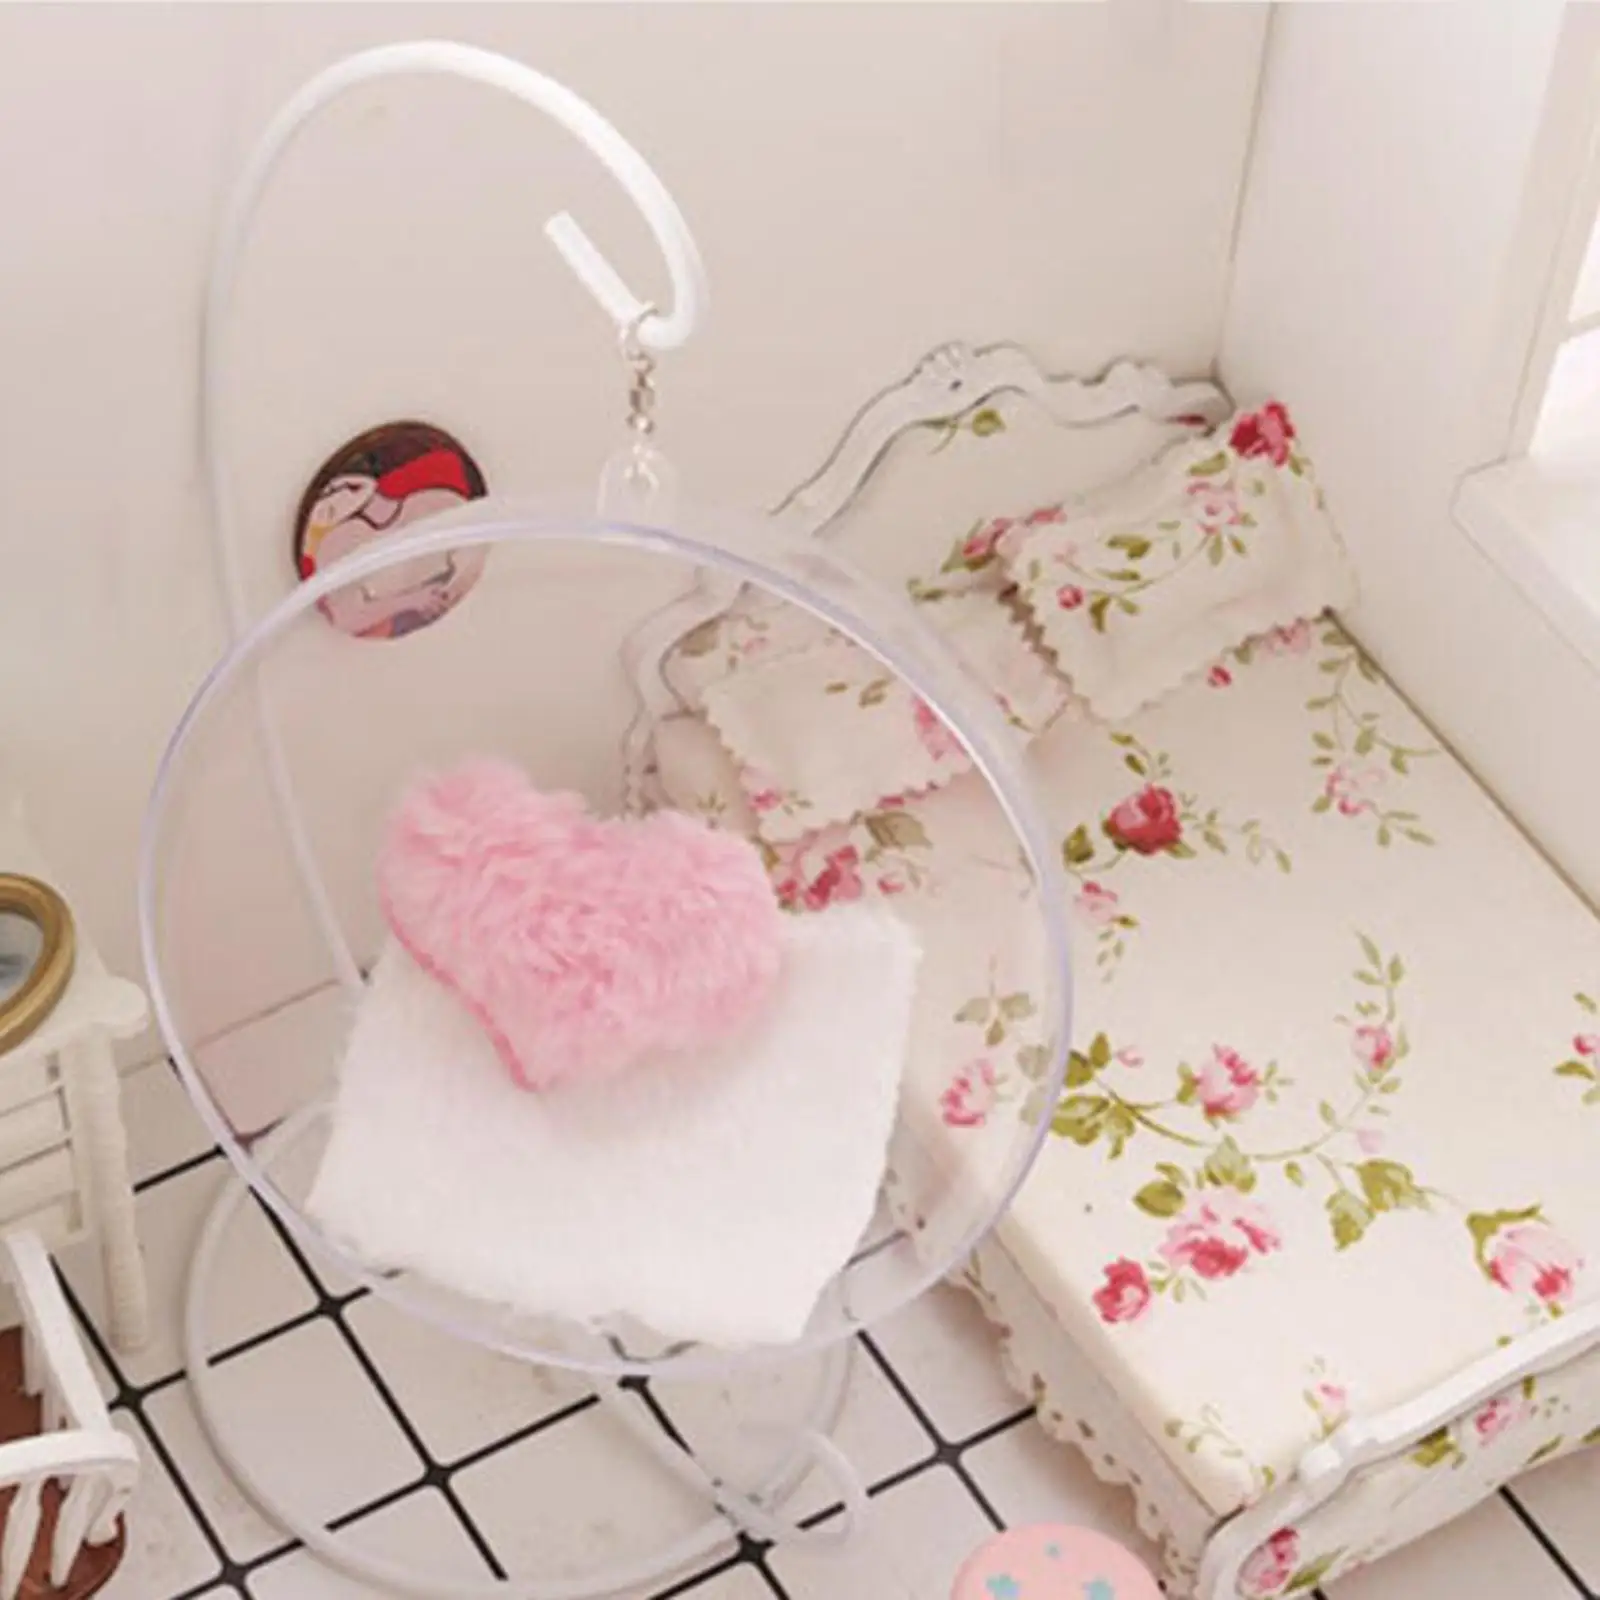 Miniature Swing Chair Simulation Model Display for Play House Toys Kids